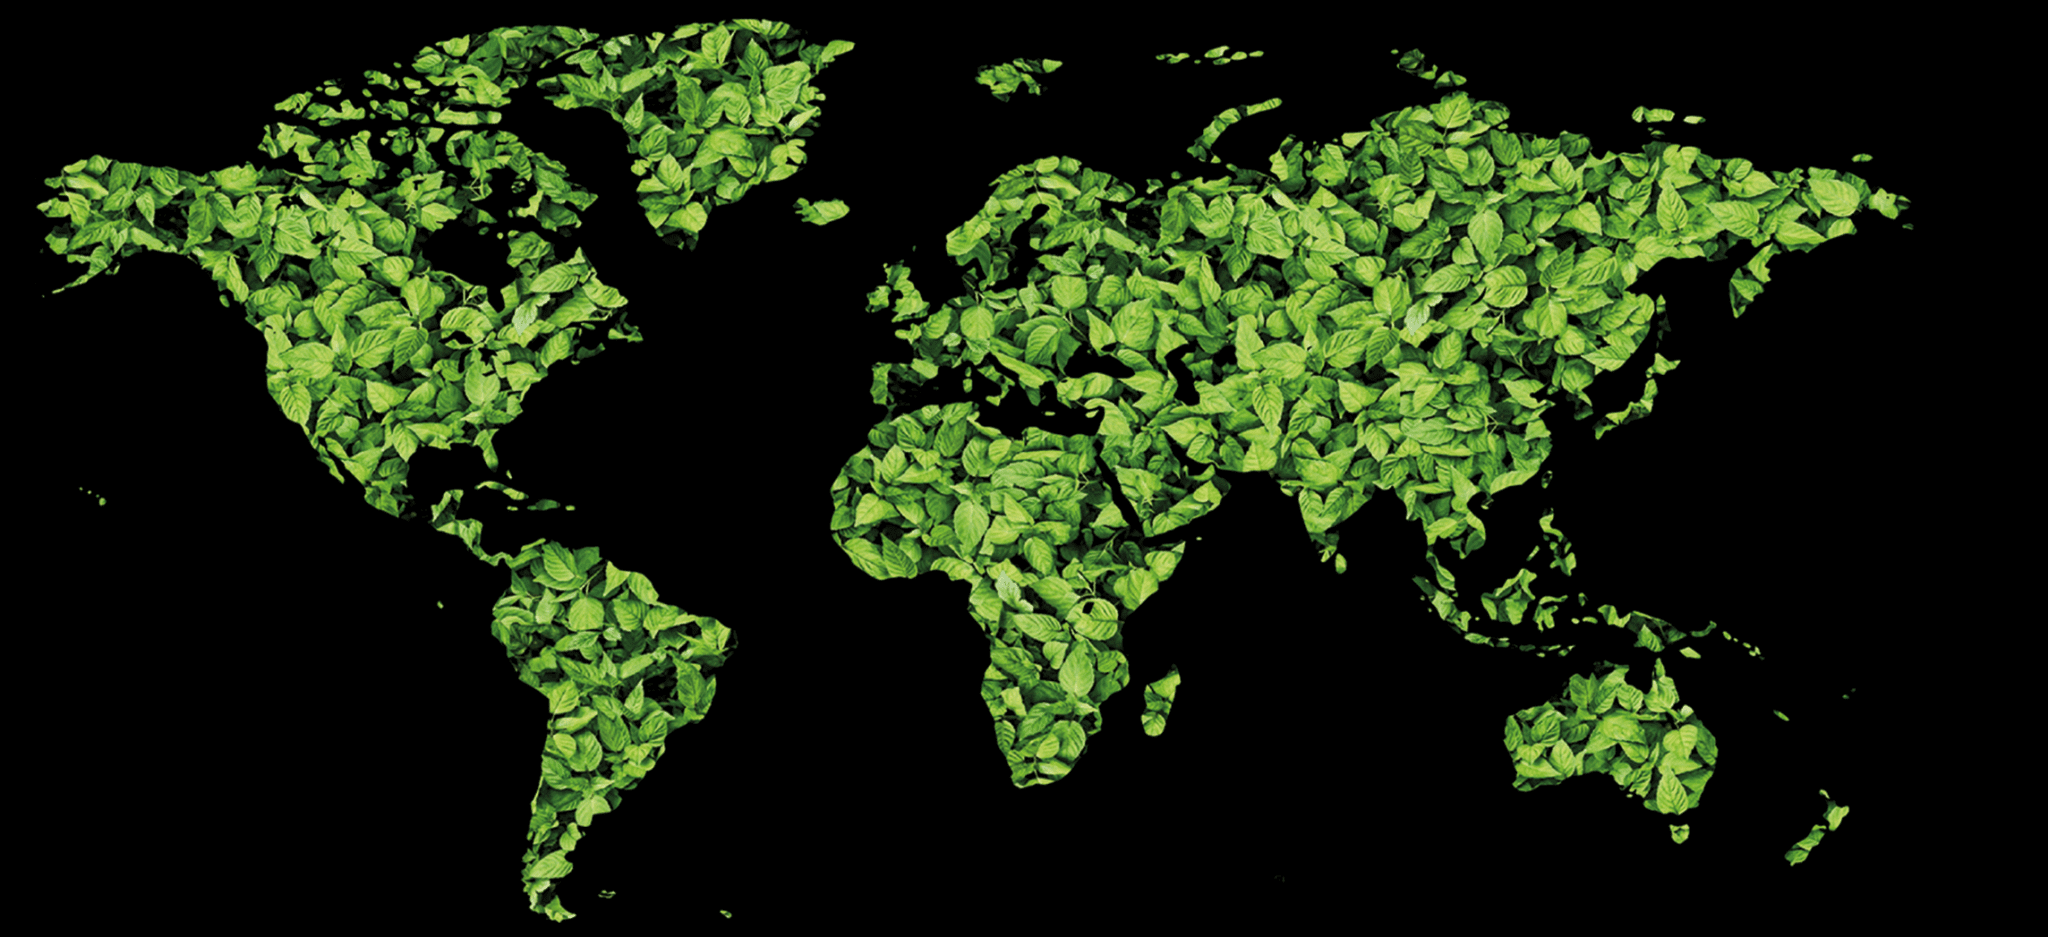 A world map made out of leaves on a black background